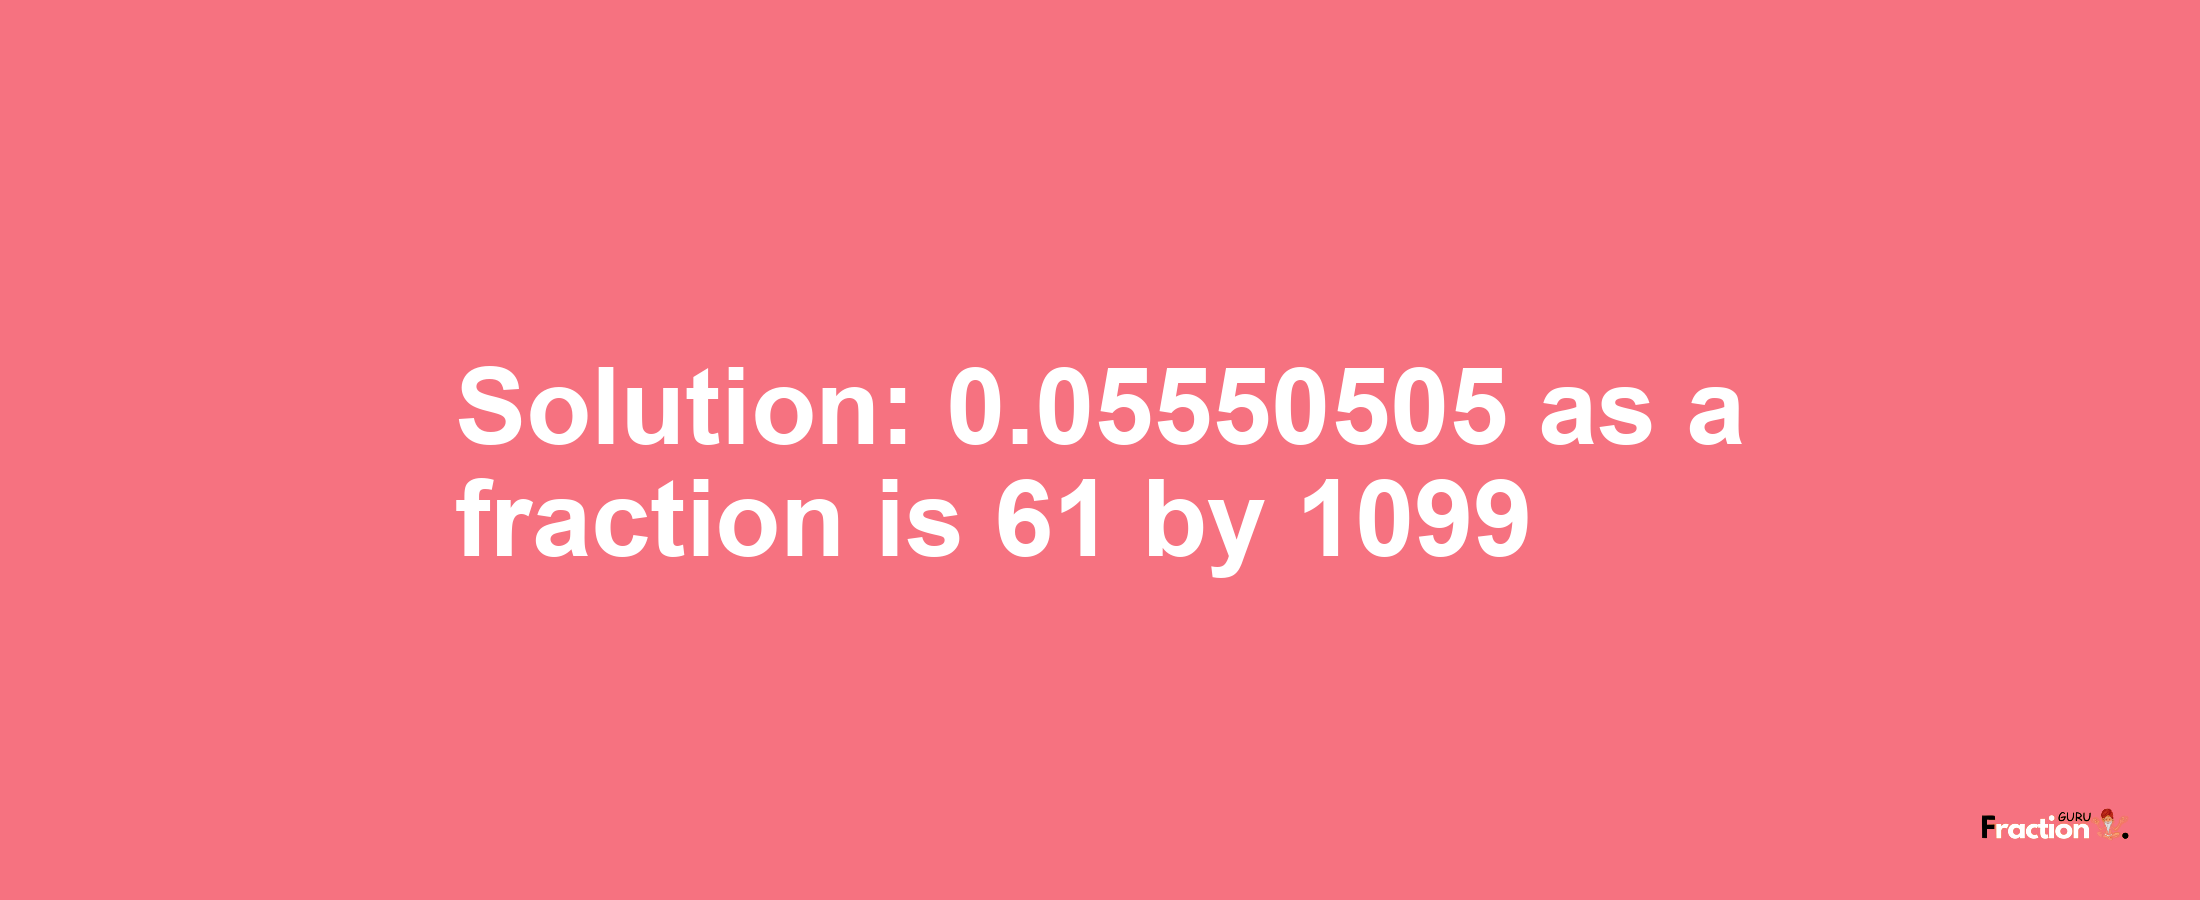 Solution:0.05550505 as a fraction is 61/1099